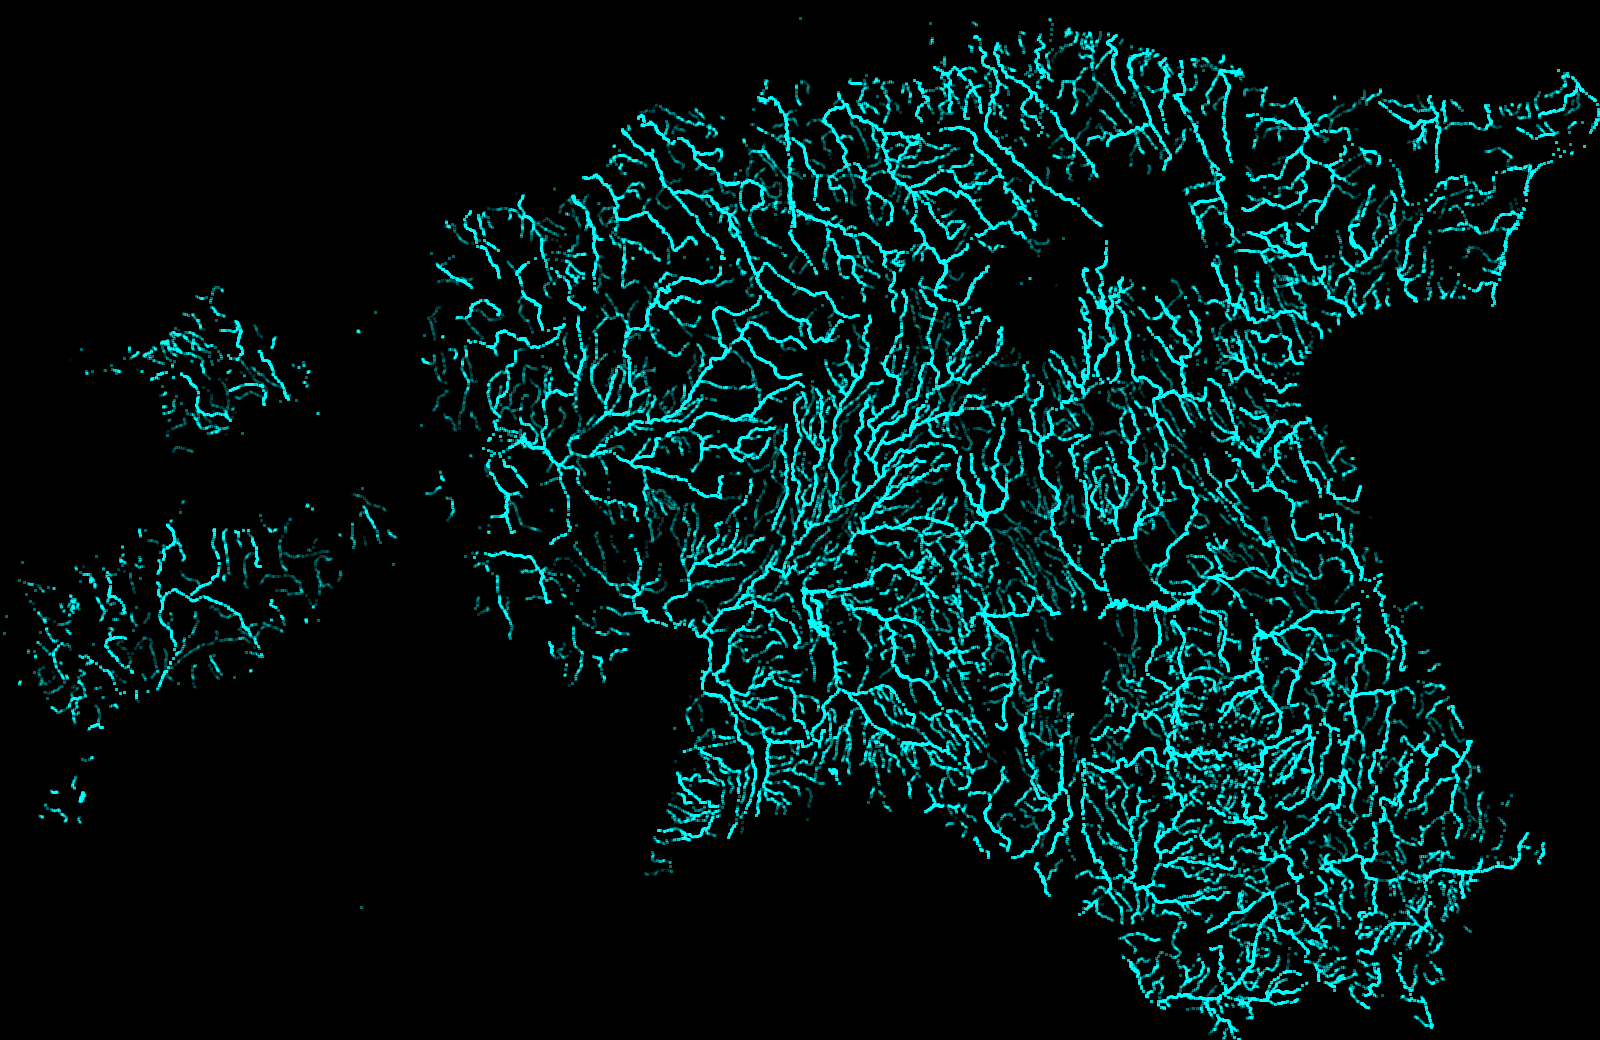 _images/day-02-river-lines.png